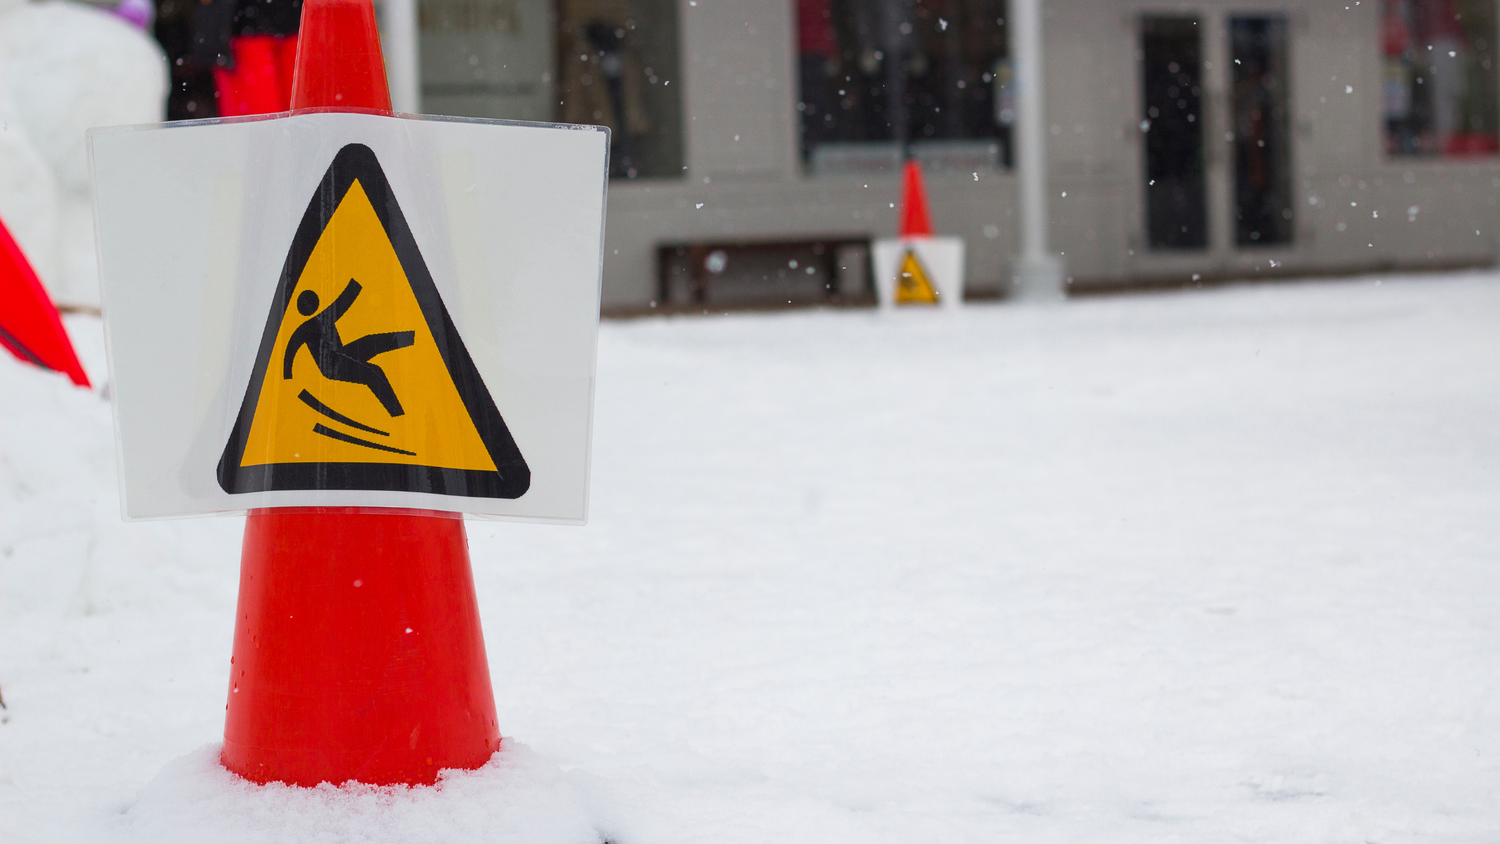 An orange cone has a picture of a stick figure slipping on ice inside a yellow triangle. The ground around the cone is covered in snow.